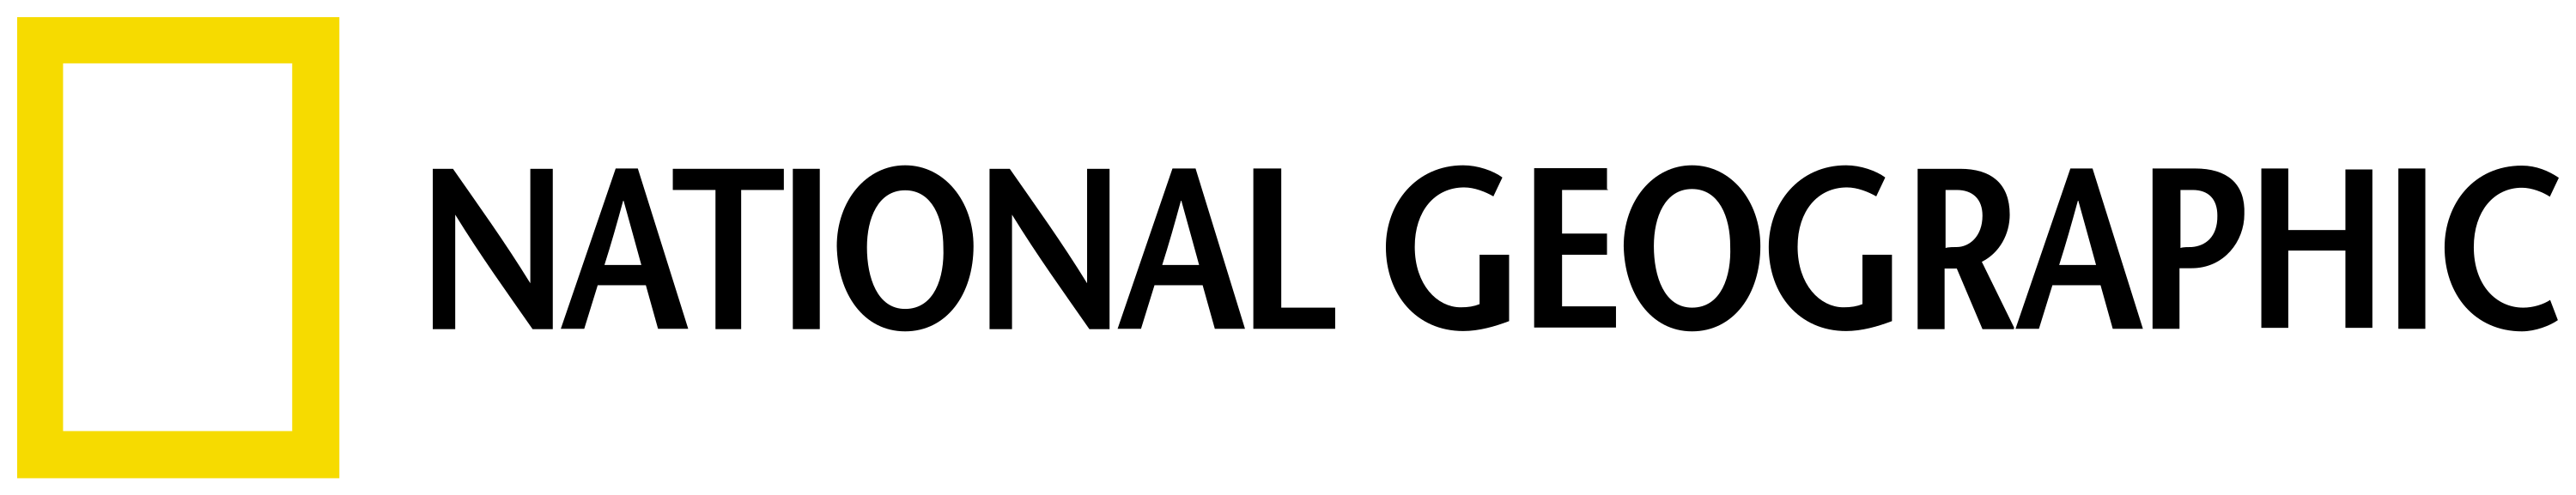 National Geographic Logo - File:National Geographic Logo.svg - Wikimedia Commons